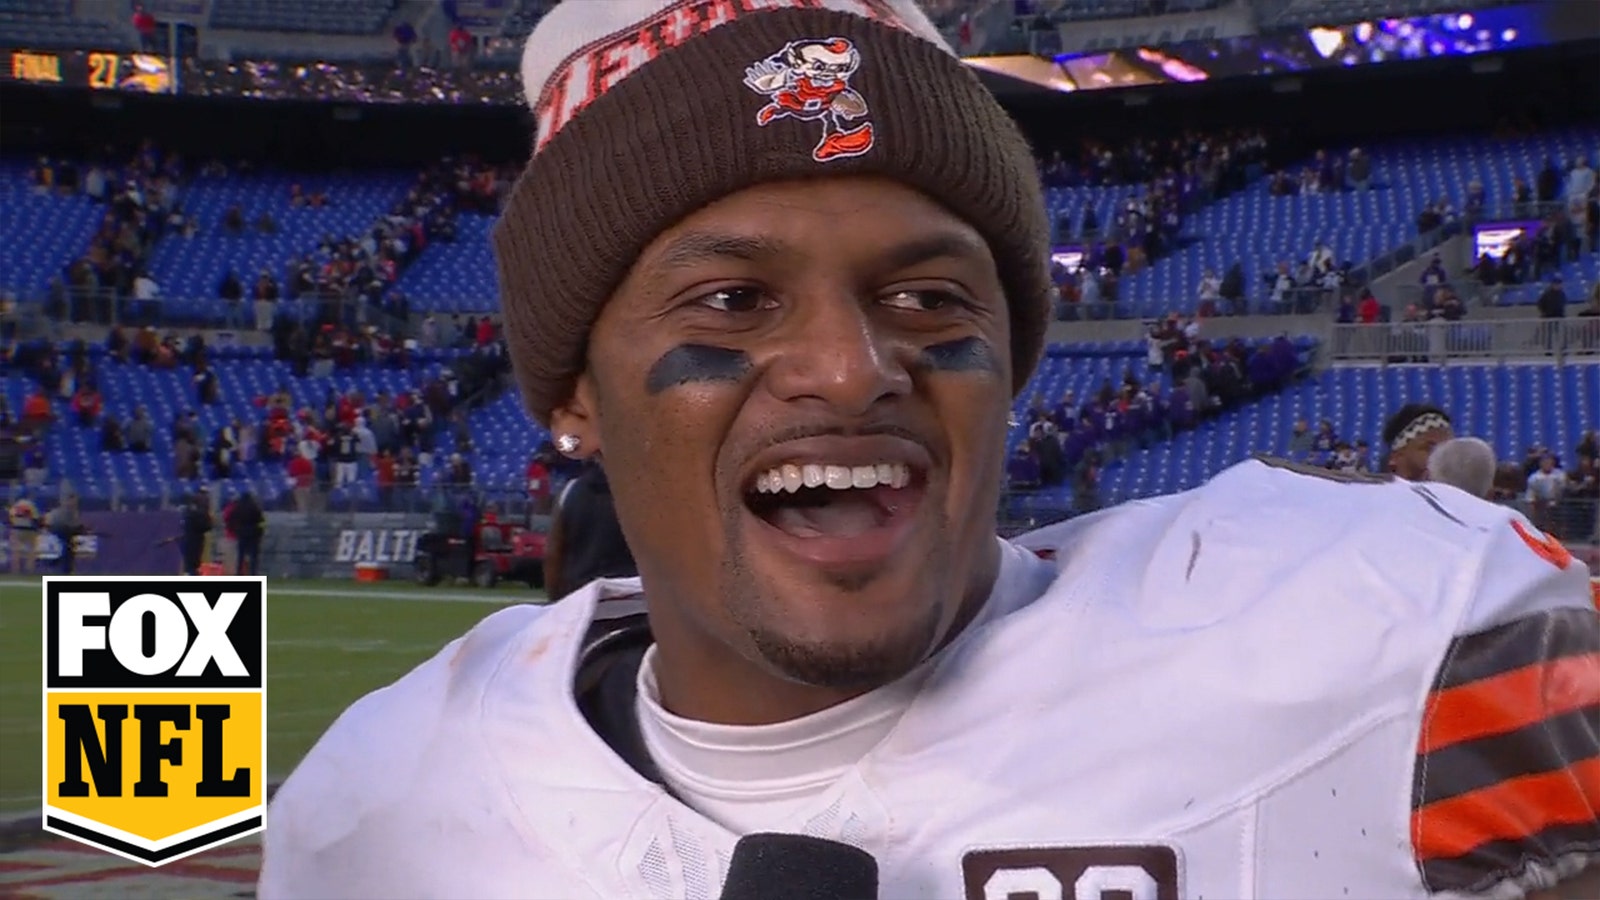 'We never quit' – Deshaun Watson speaks on Browns' resilience after comeback win over Ravens 